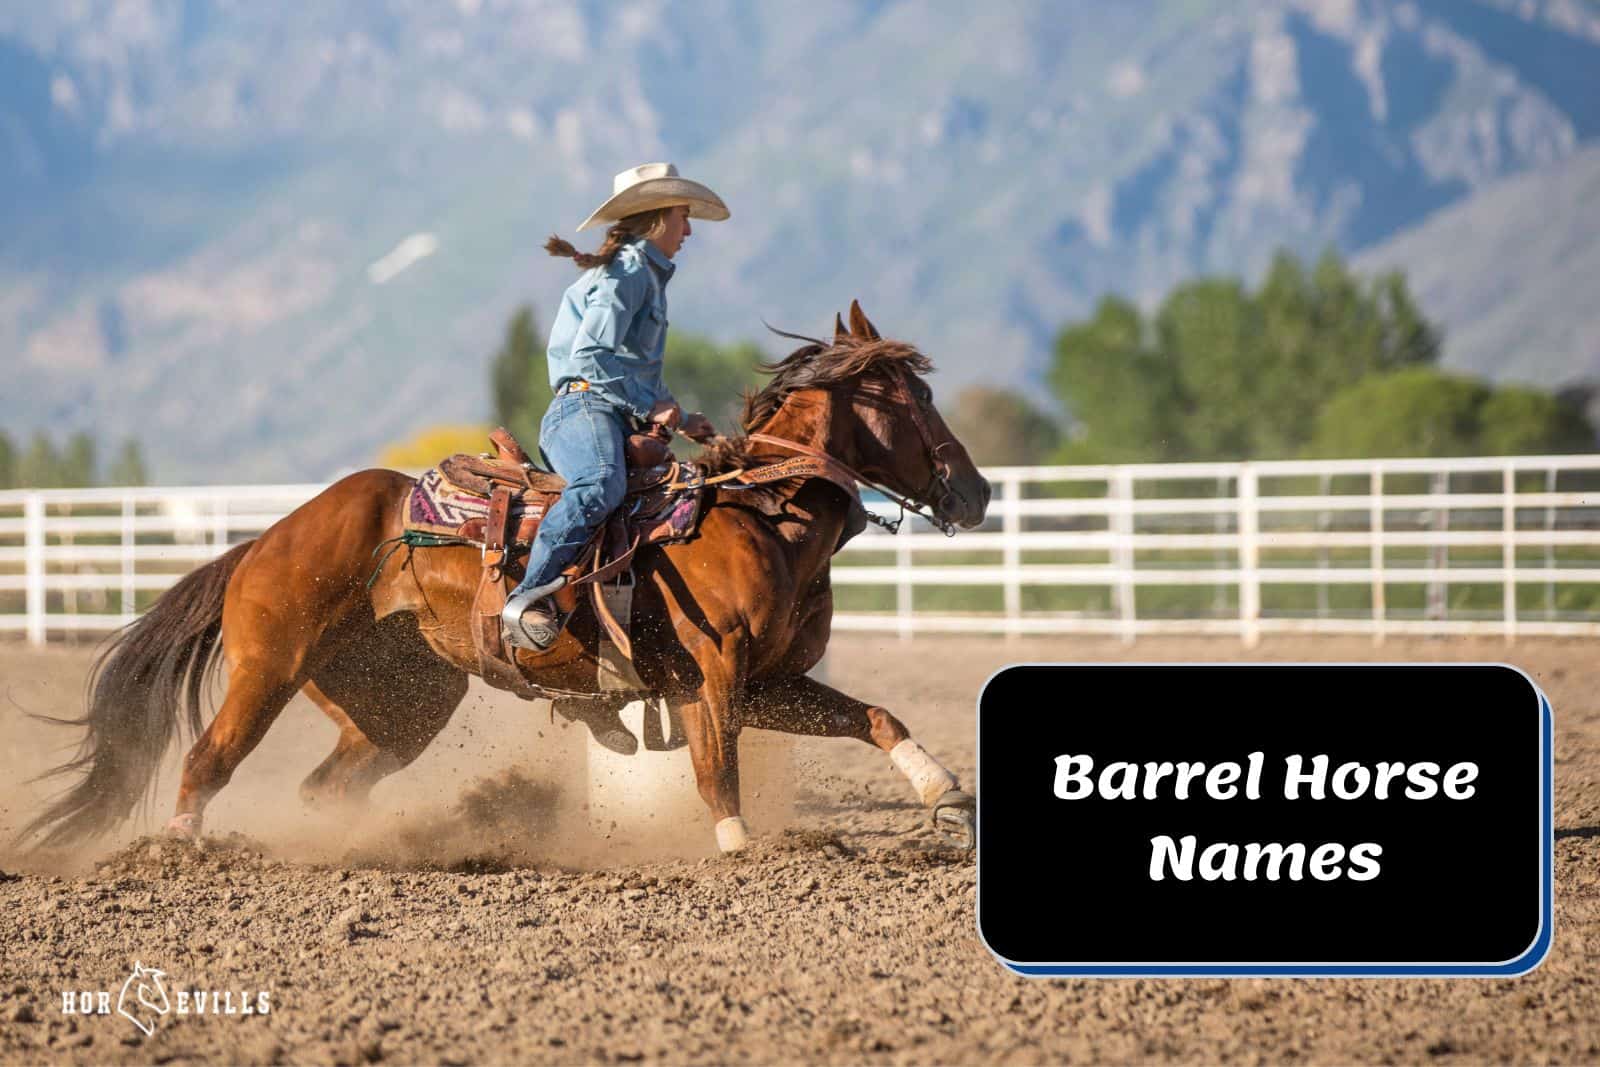 lady riding a horse for the barrel competition (barrel horse names)